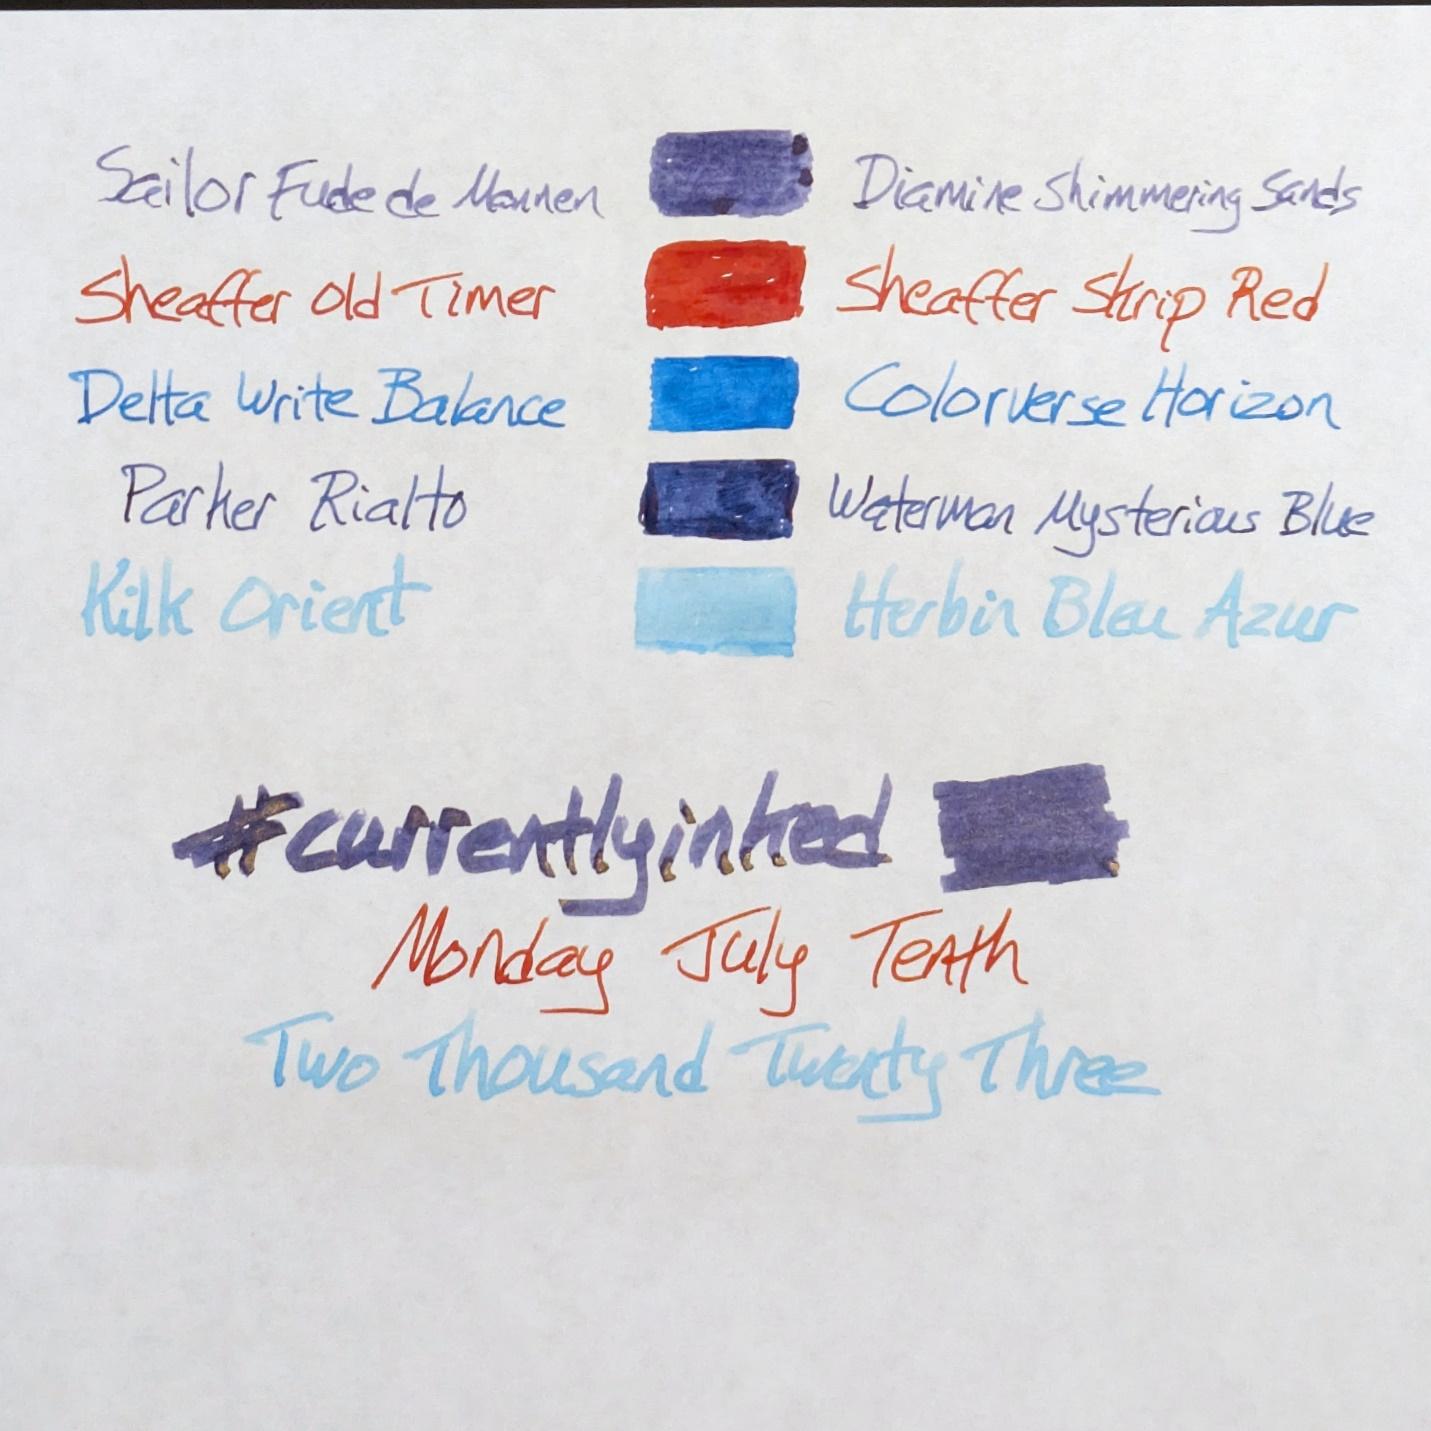 I made a mistake with the Diamine ink name in this list. It is Shimmering Seas, not sands. I'd already redone the list once, didn't feel like doing it again. 